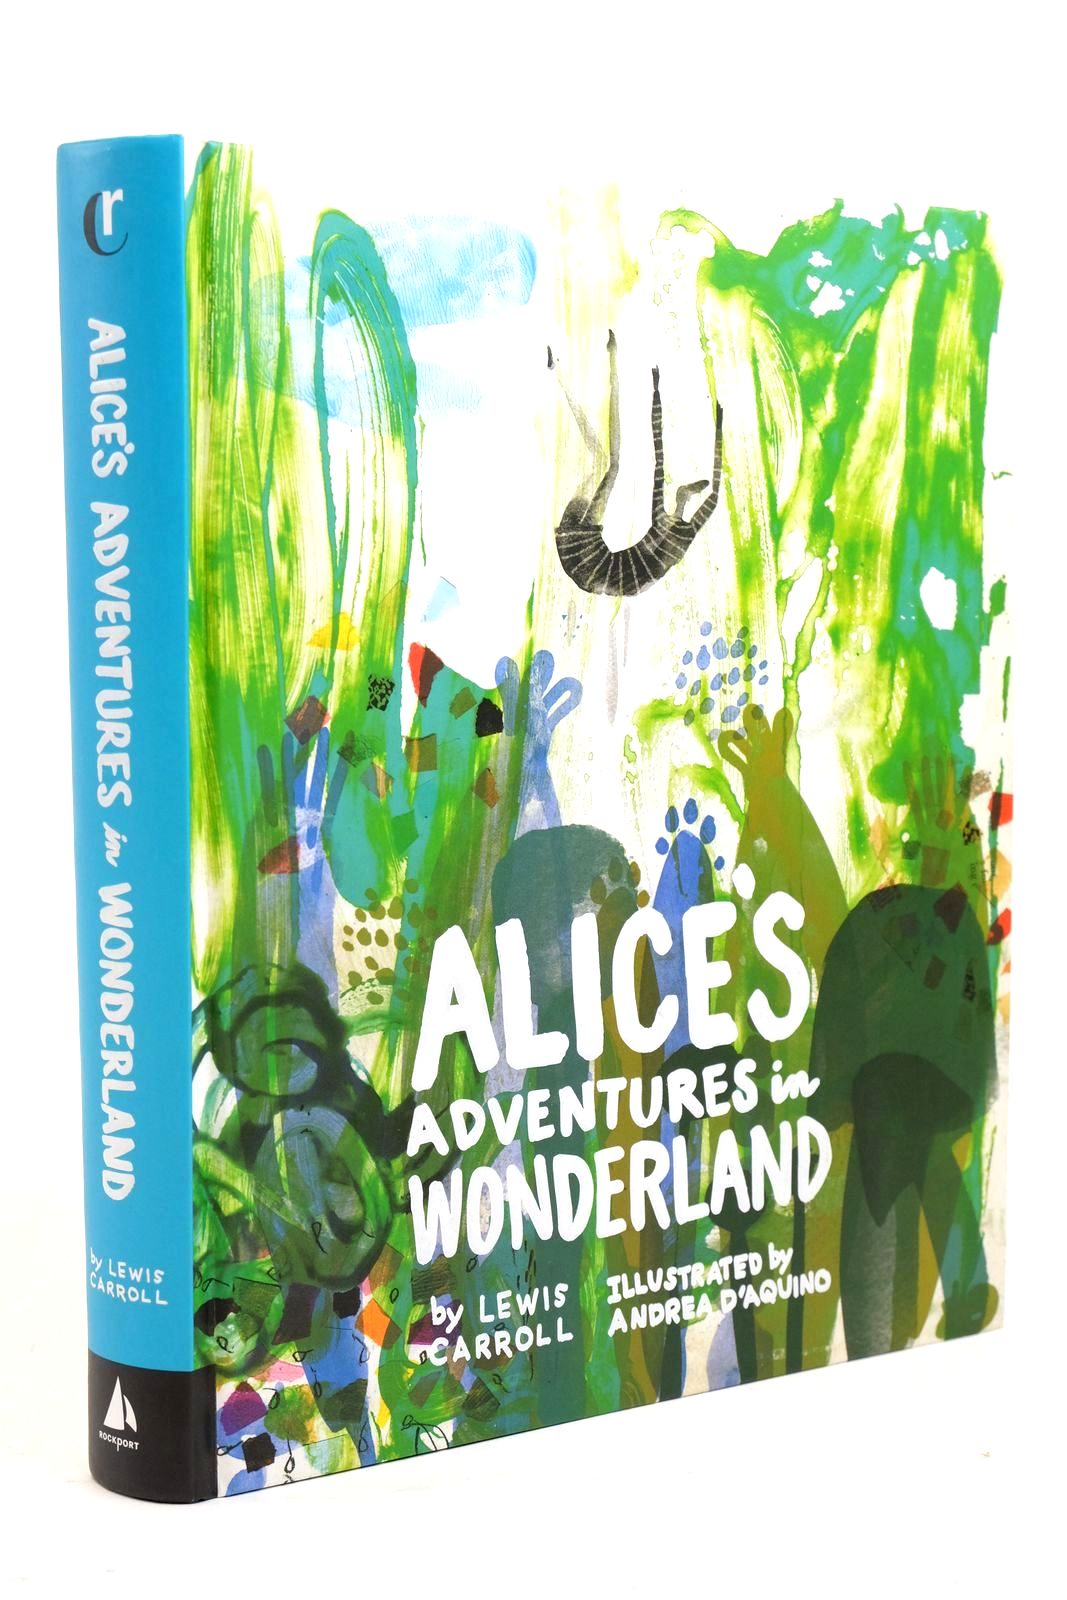 Photo of ALICE'S ADVENTURES IN WONDERLAND written by Carroll, Lewis Dobson, Austin illustrated by D'Aquino, Andrea published by Rockport Publishers Inc. (STOCK CODE: 1321197)  for sale by Stella & Rose's Books